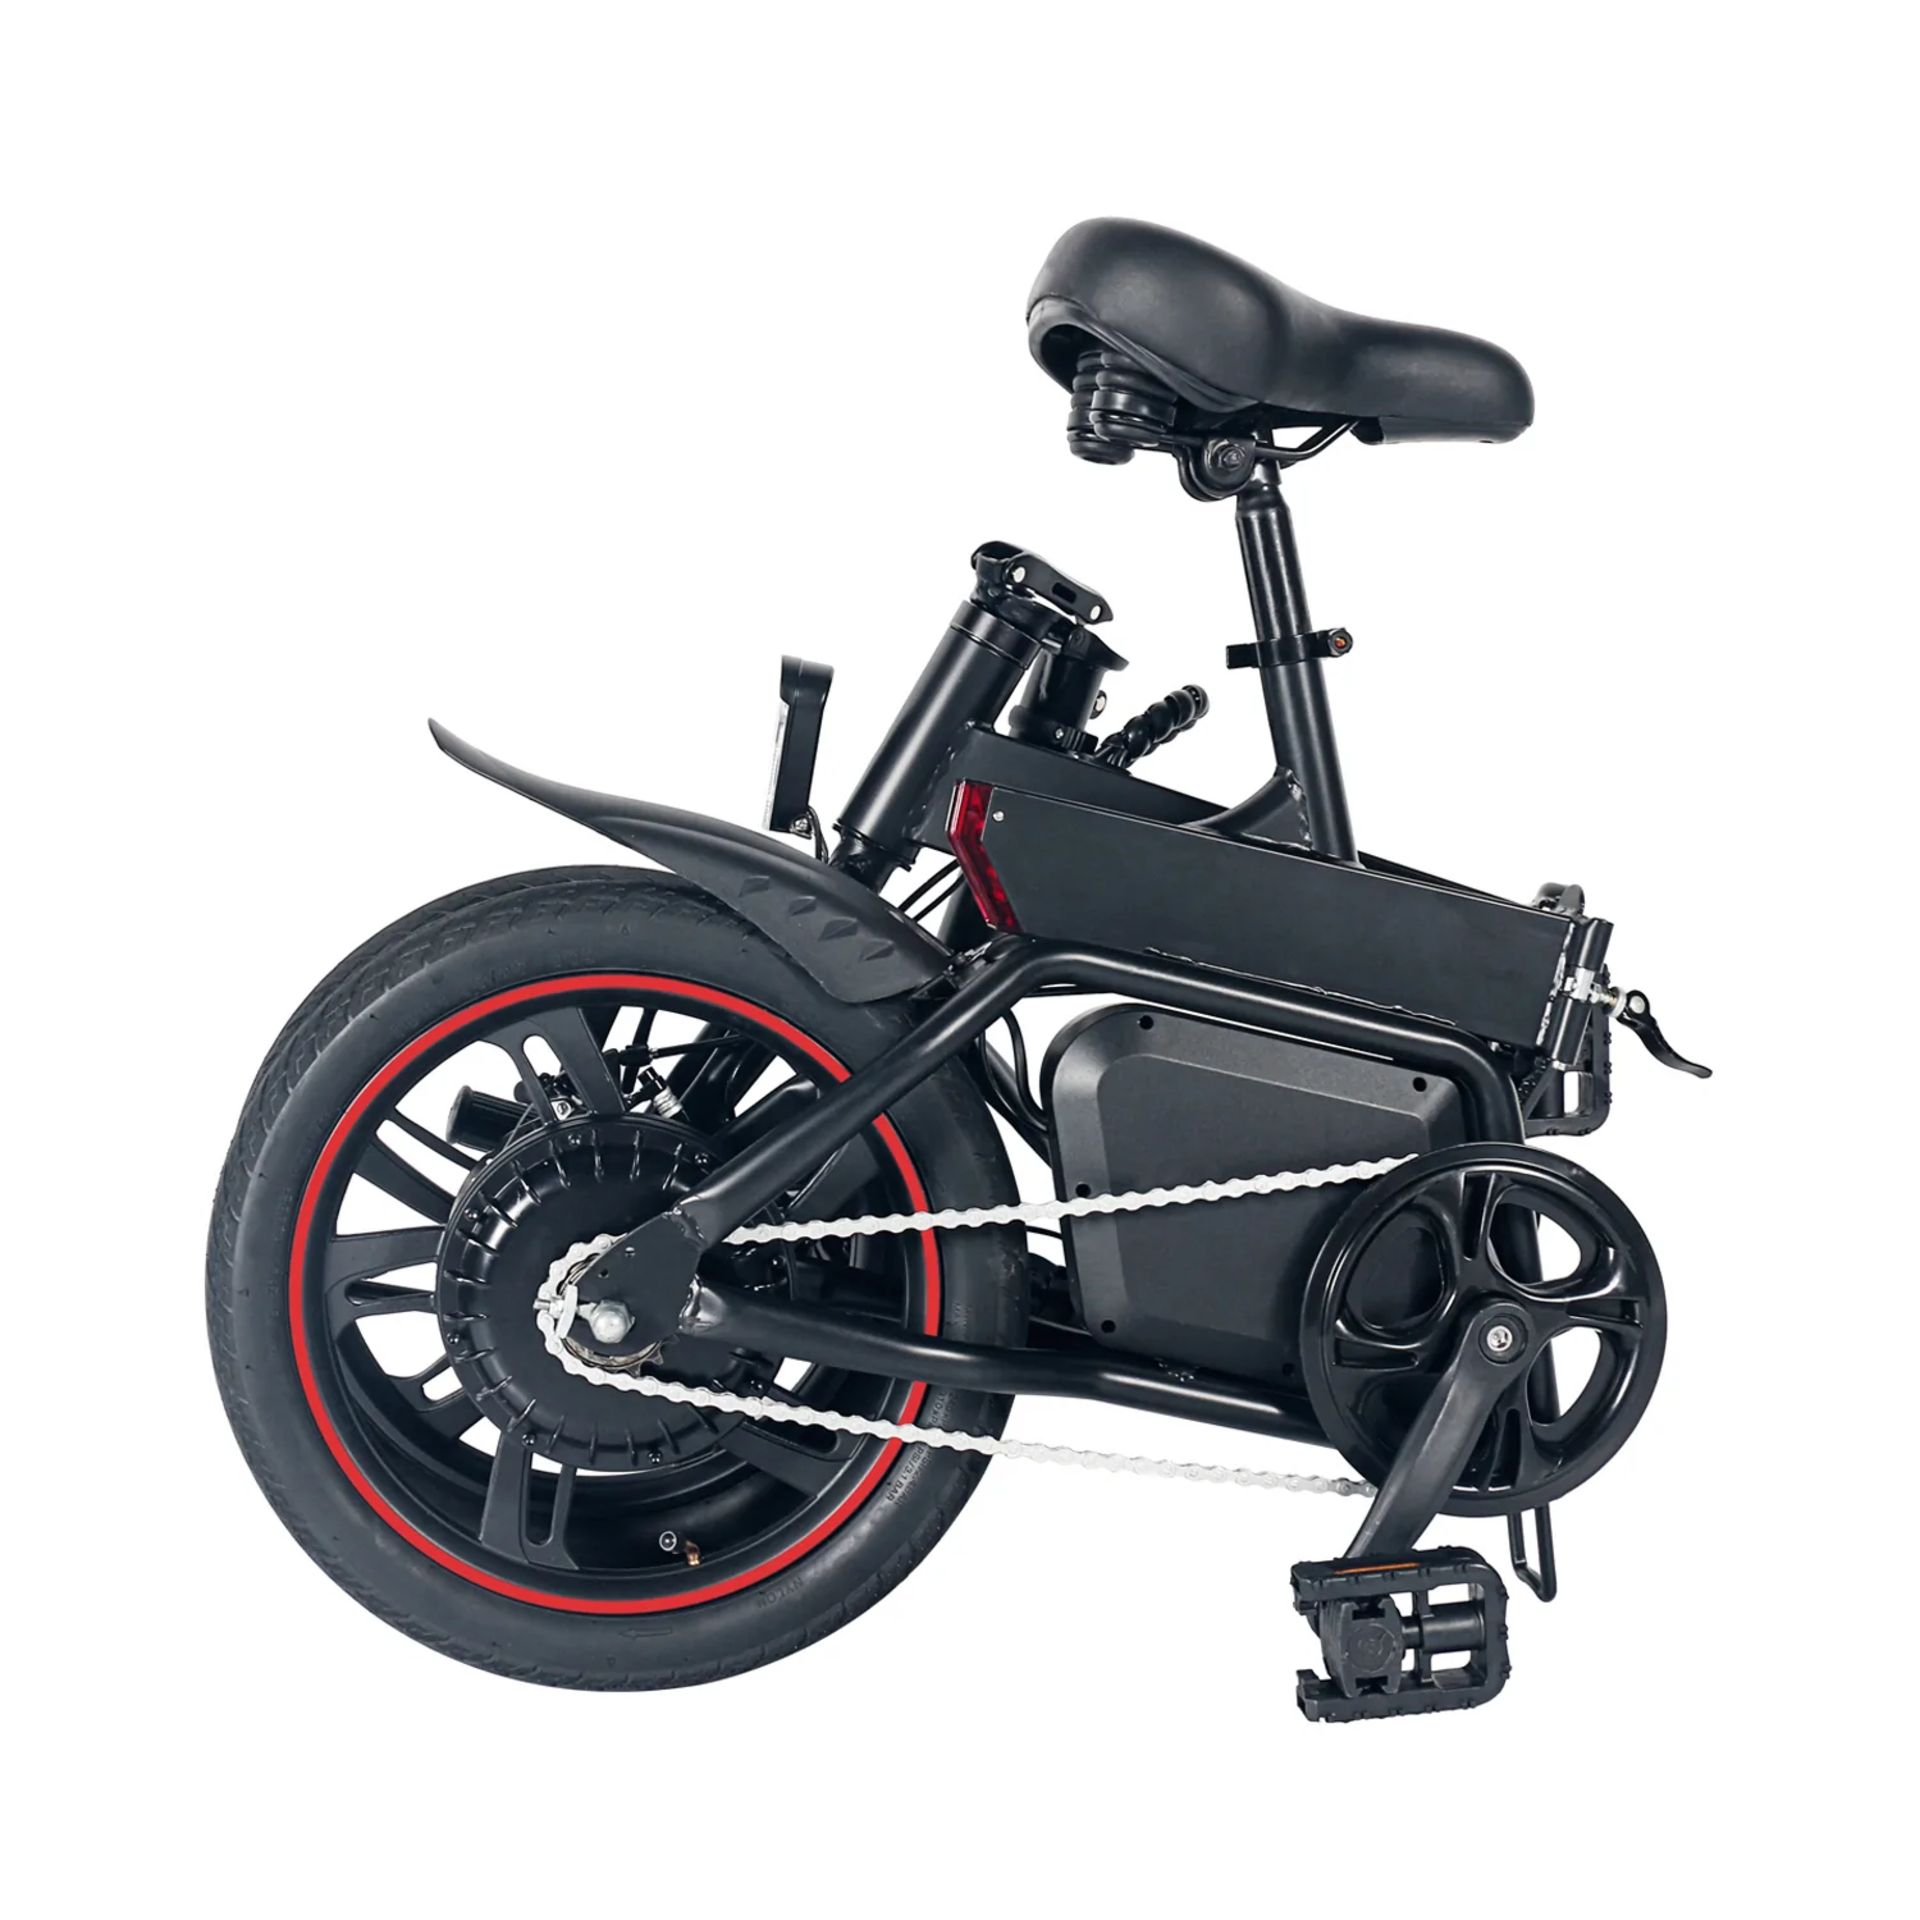 5 X Windgoo B20 Pro Electric Bike. RRP £1,100.99. With 16-inch-wide tires and a frame of upgraded - Image 5 of 7